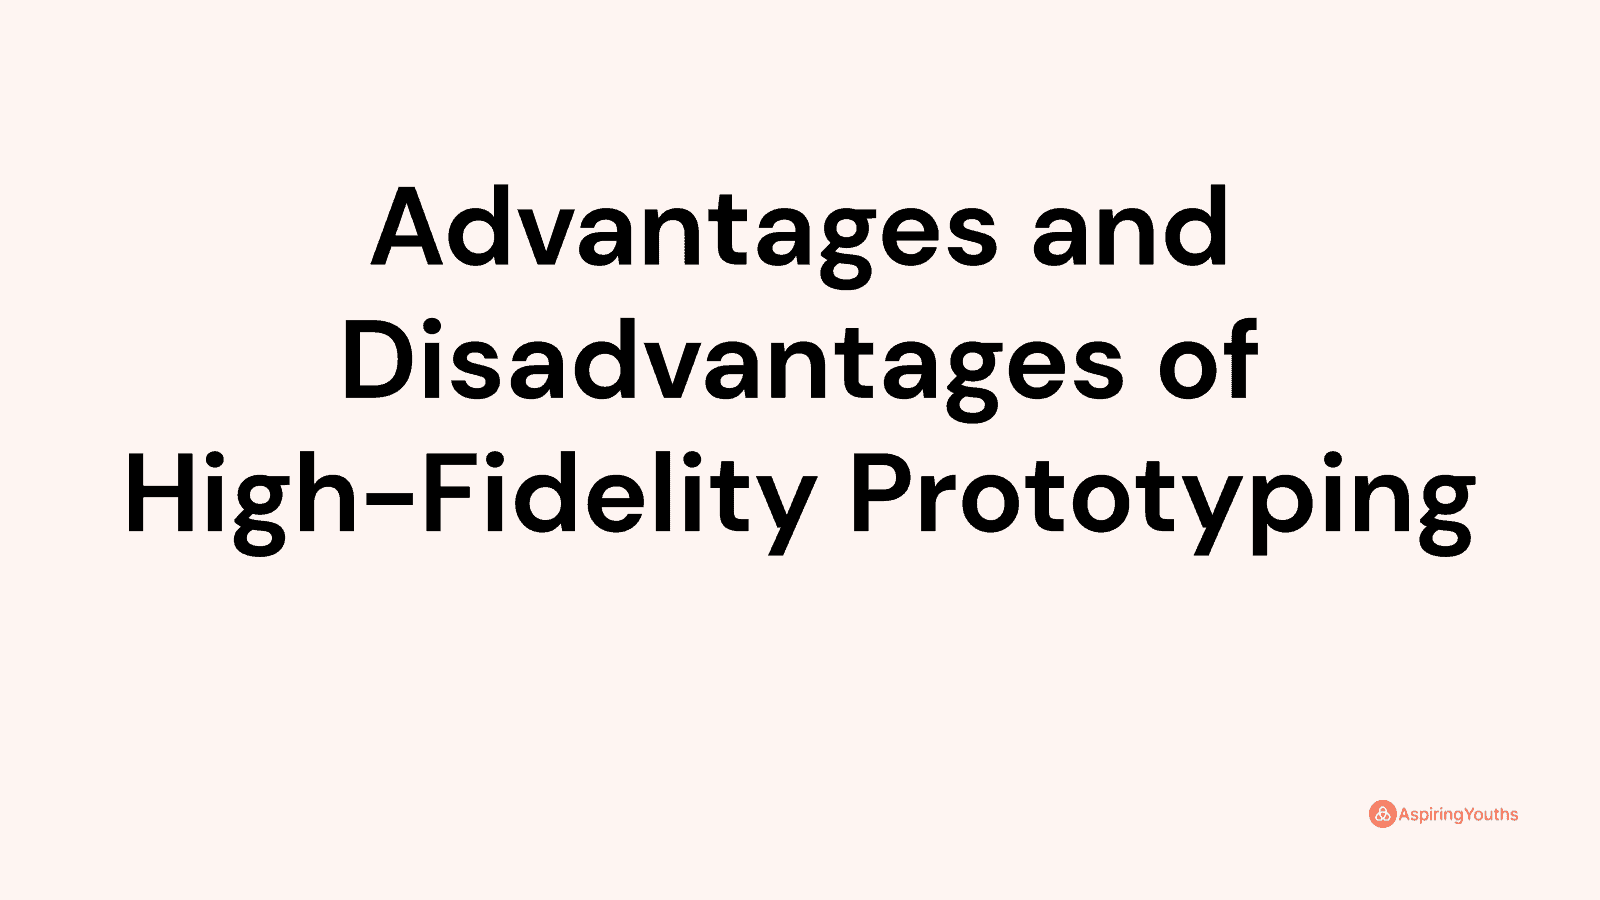 Advantages and disadvantages of High-Fidelity Prototyping